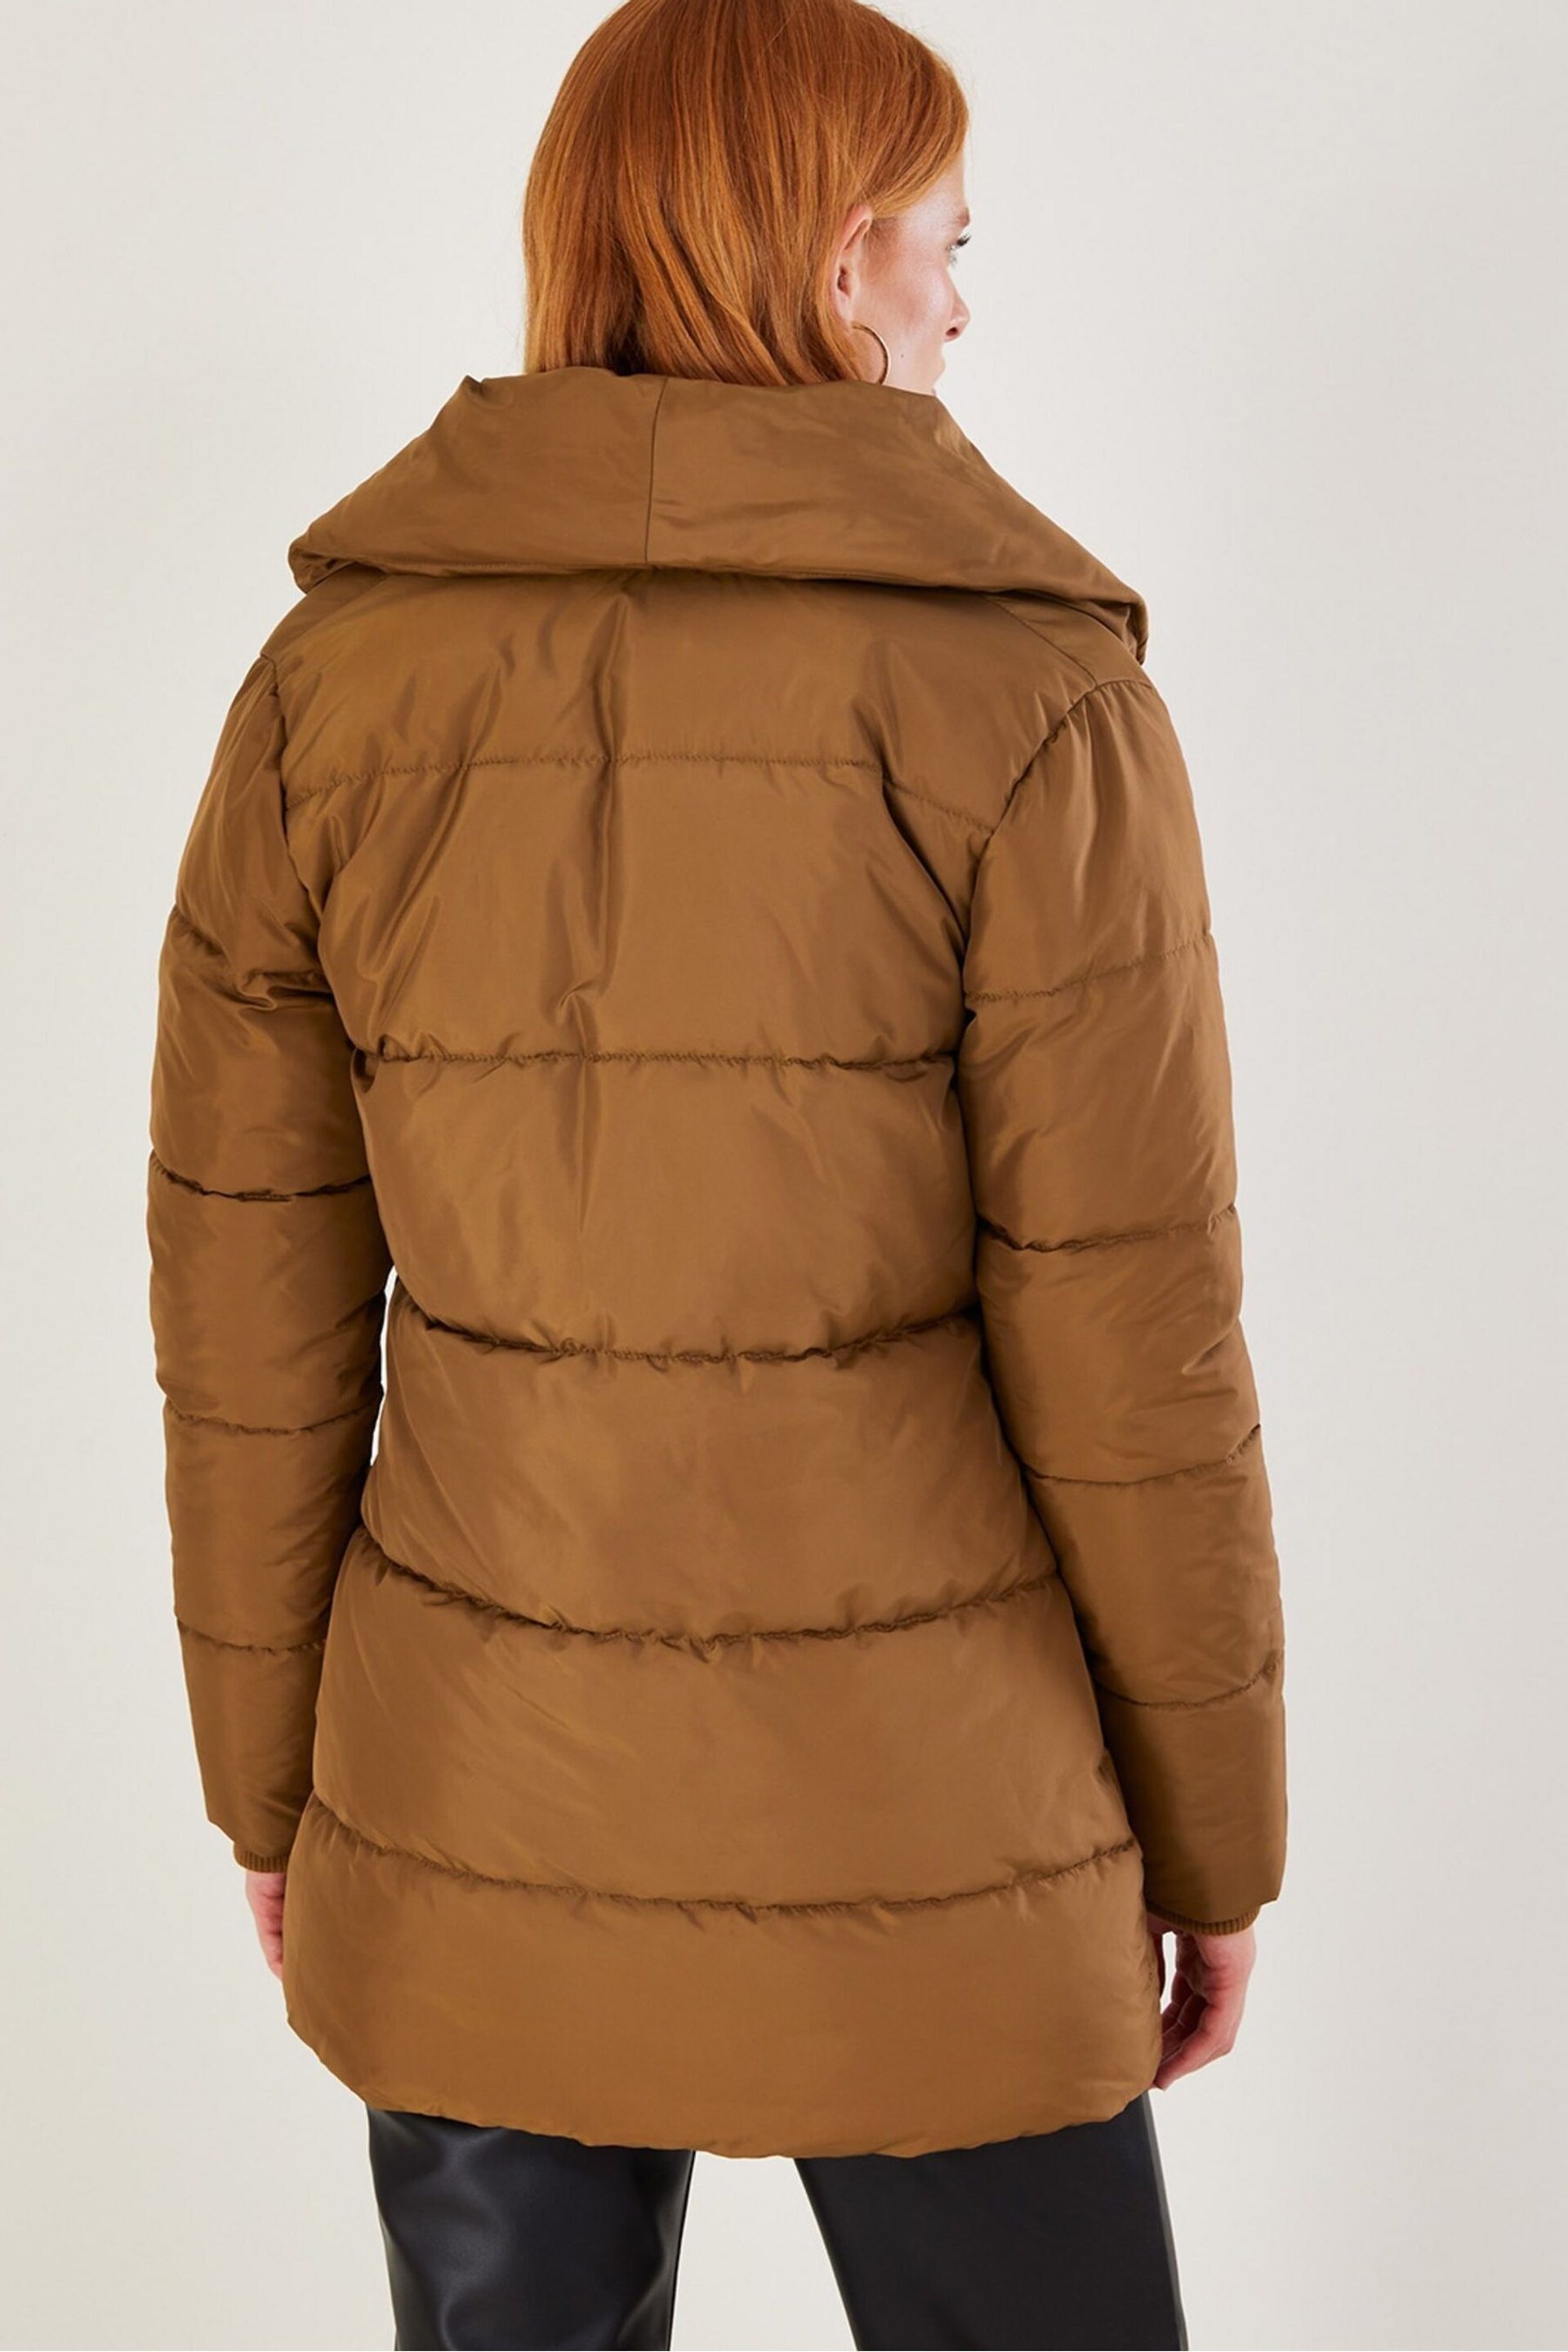 Monsoon Brown Shawl Collar Shannon Padded Coat - Image 2 of 4